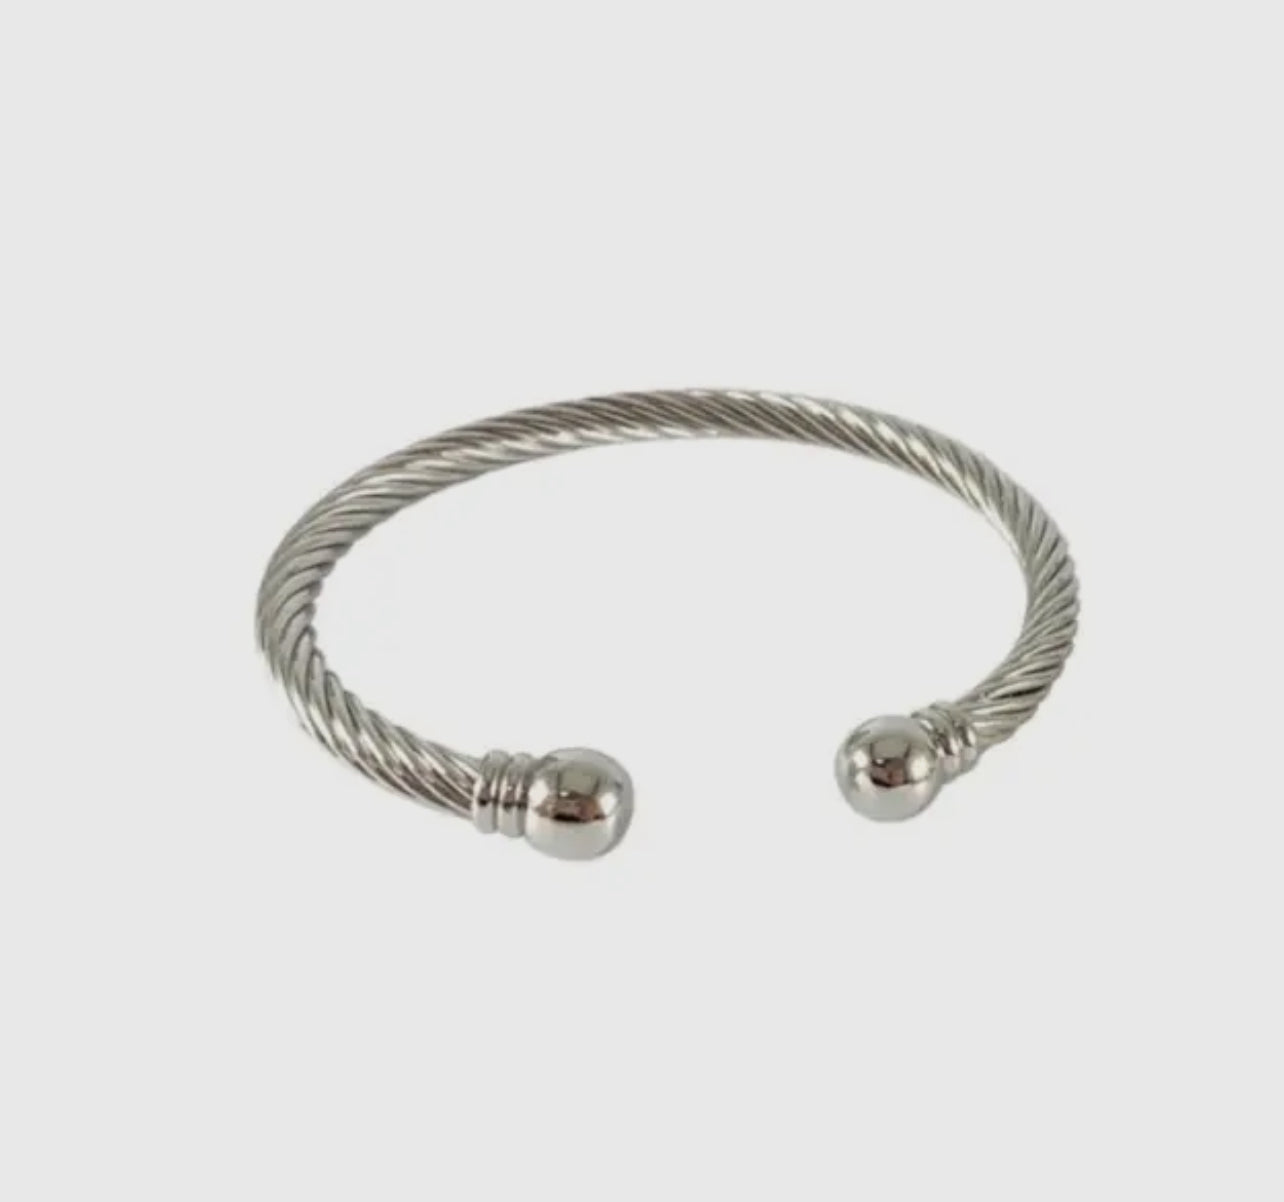 Cable Cuff in Silver or Gold